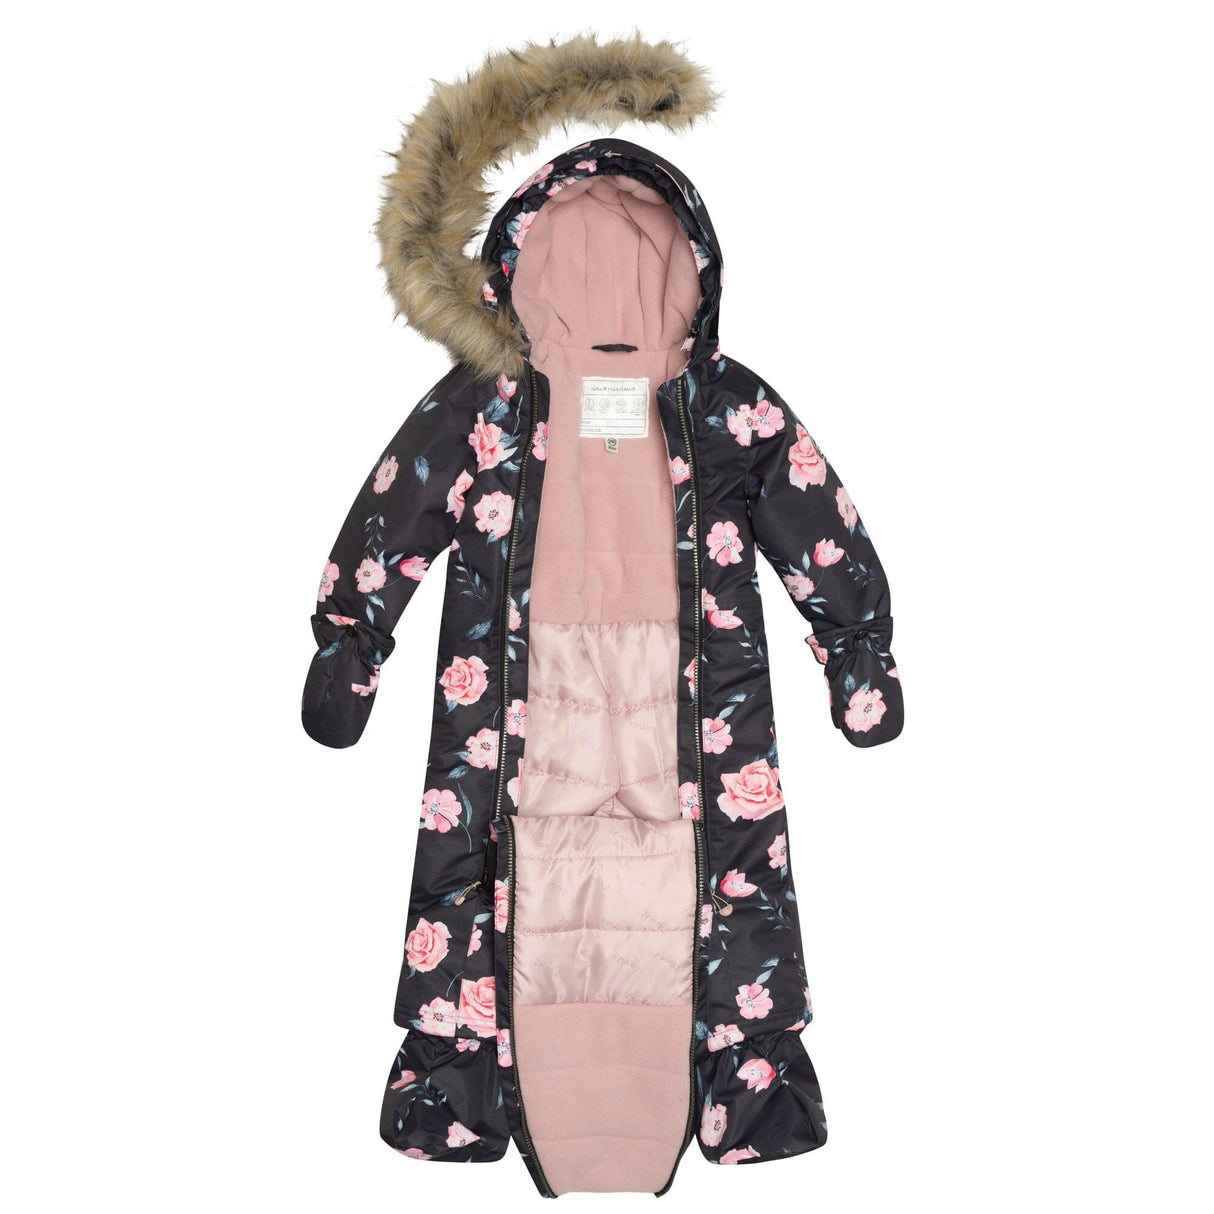 One Piece Baby Snowsuit Black With Rose Print-3